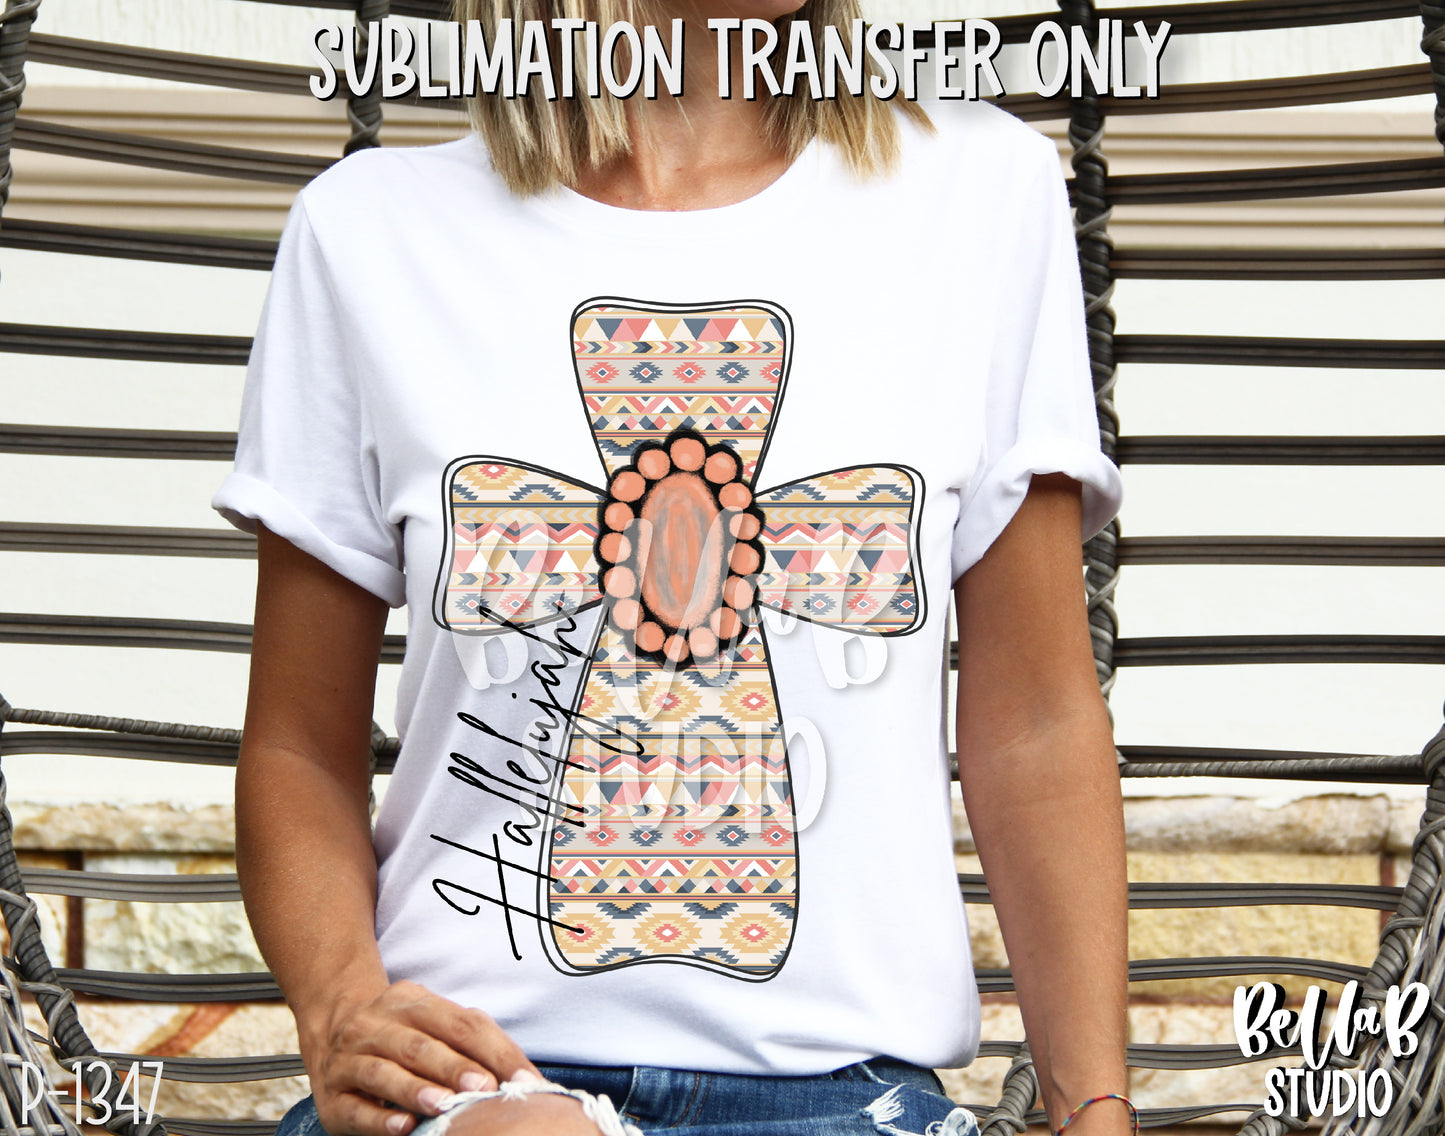 Hallelujah Aztec Cross With Pink Gem Sublimation Transfer, Ready To Press